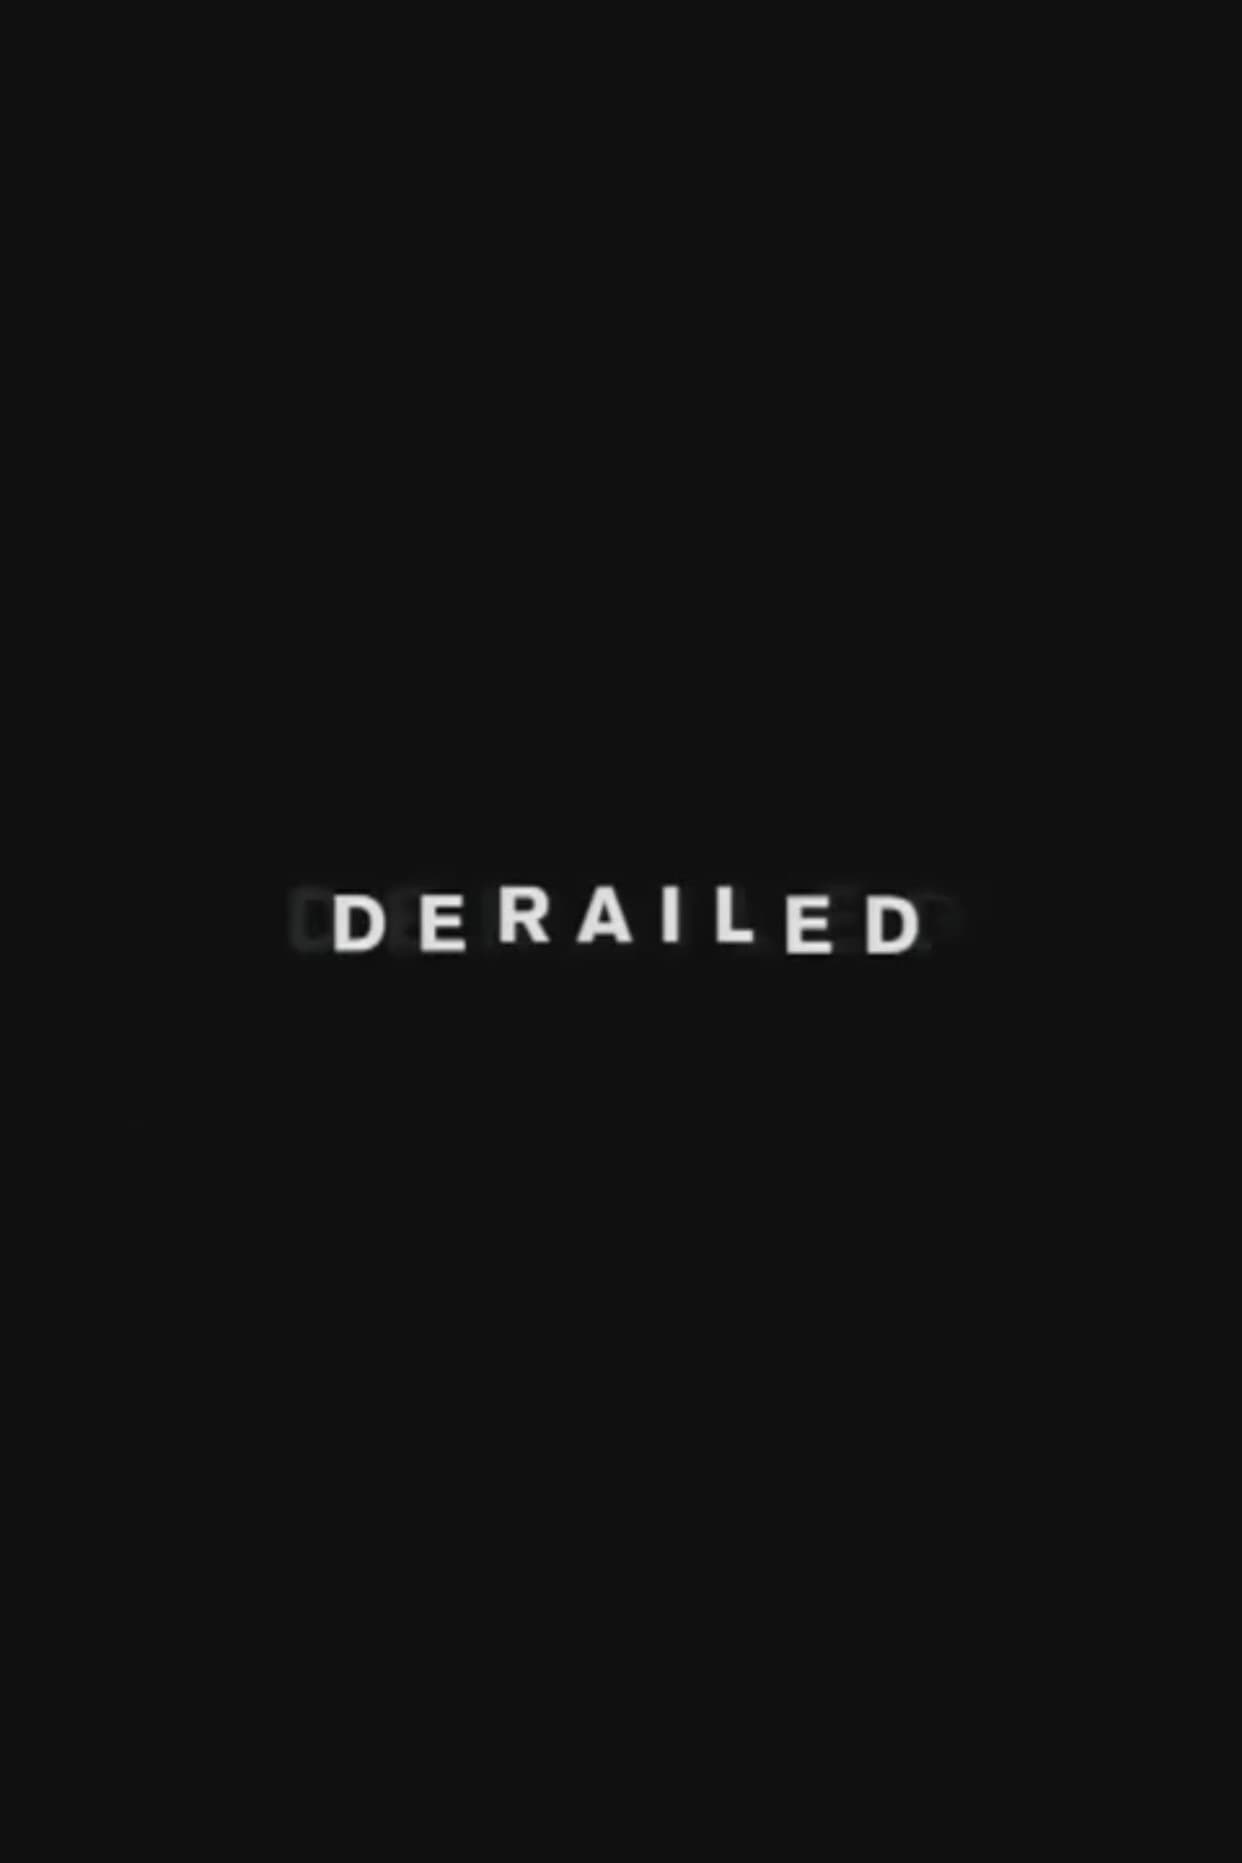 The Making of Derailed (2006)